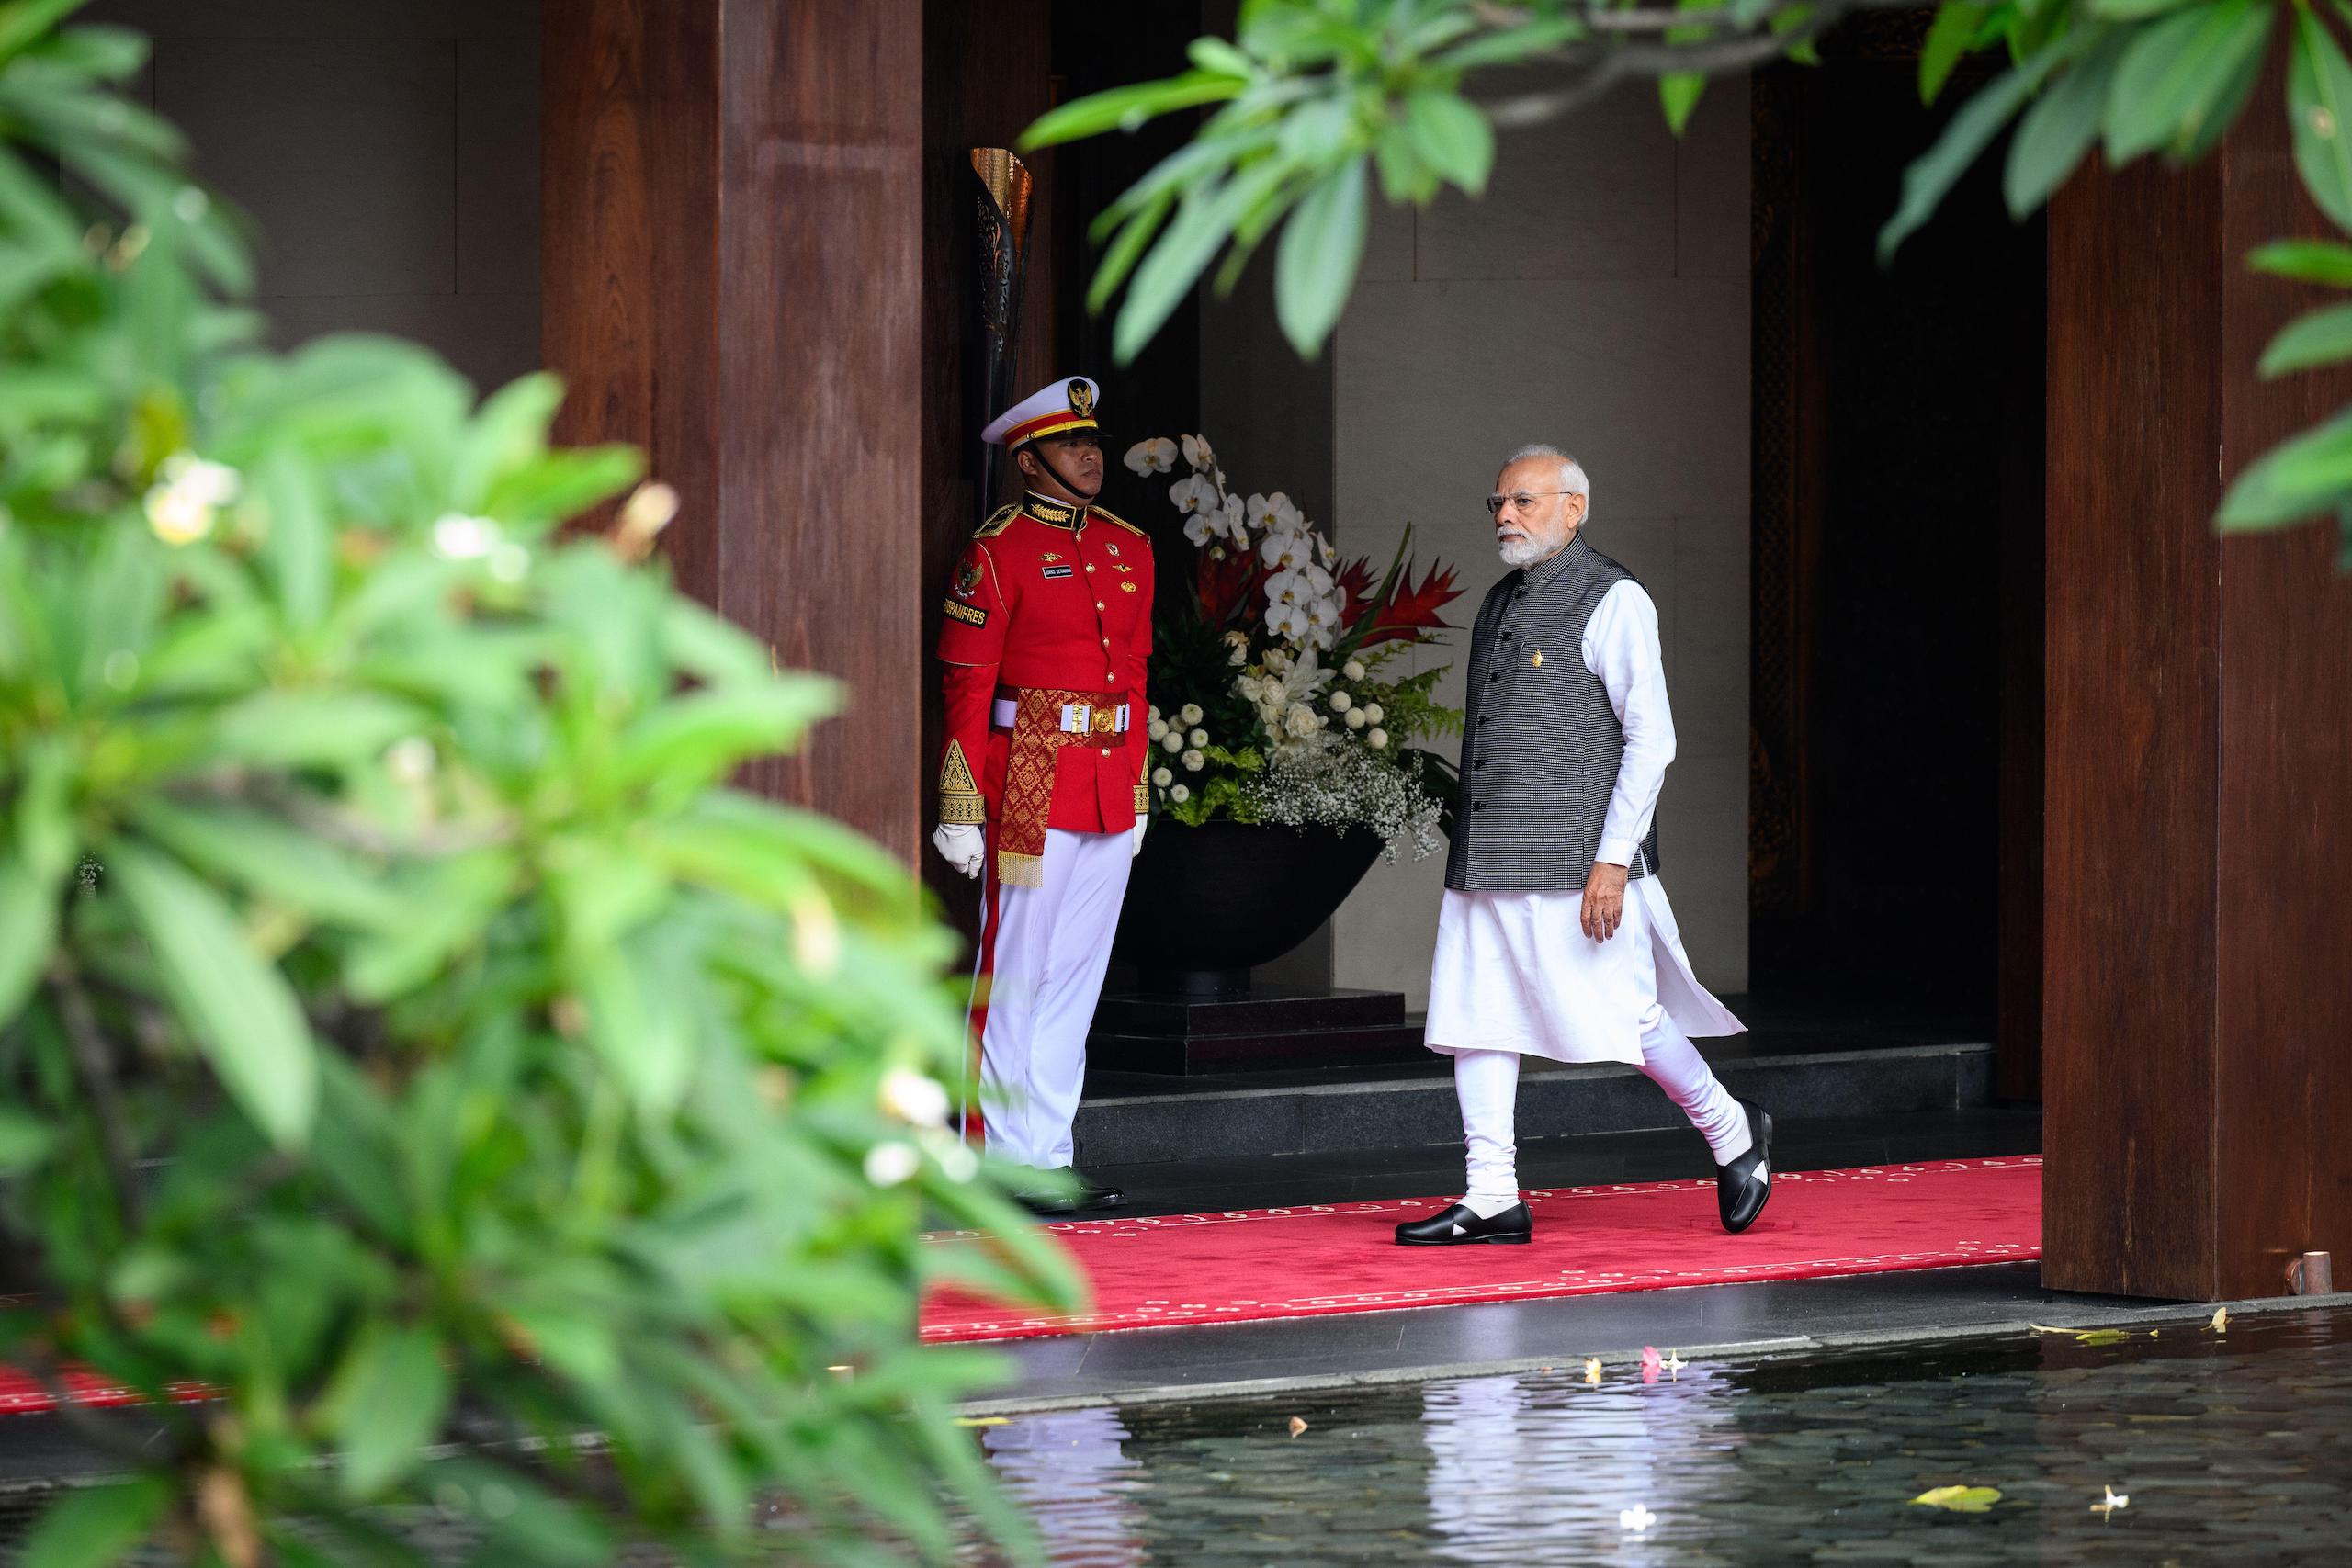 <p>Indian prime minister Narendra Modi arriving at a G20 Summit welcome ceremony in Bali, Indonesia, in November 2022. As chair for 2023, India is set to welcome world leaders to its capital next week for the G20 Summit. (Image: Alamy)</p>